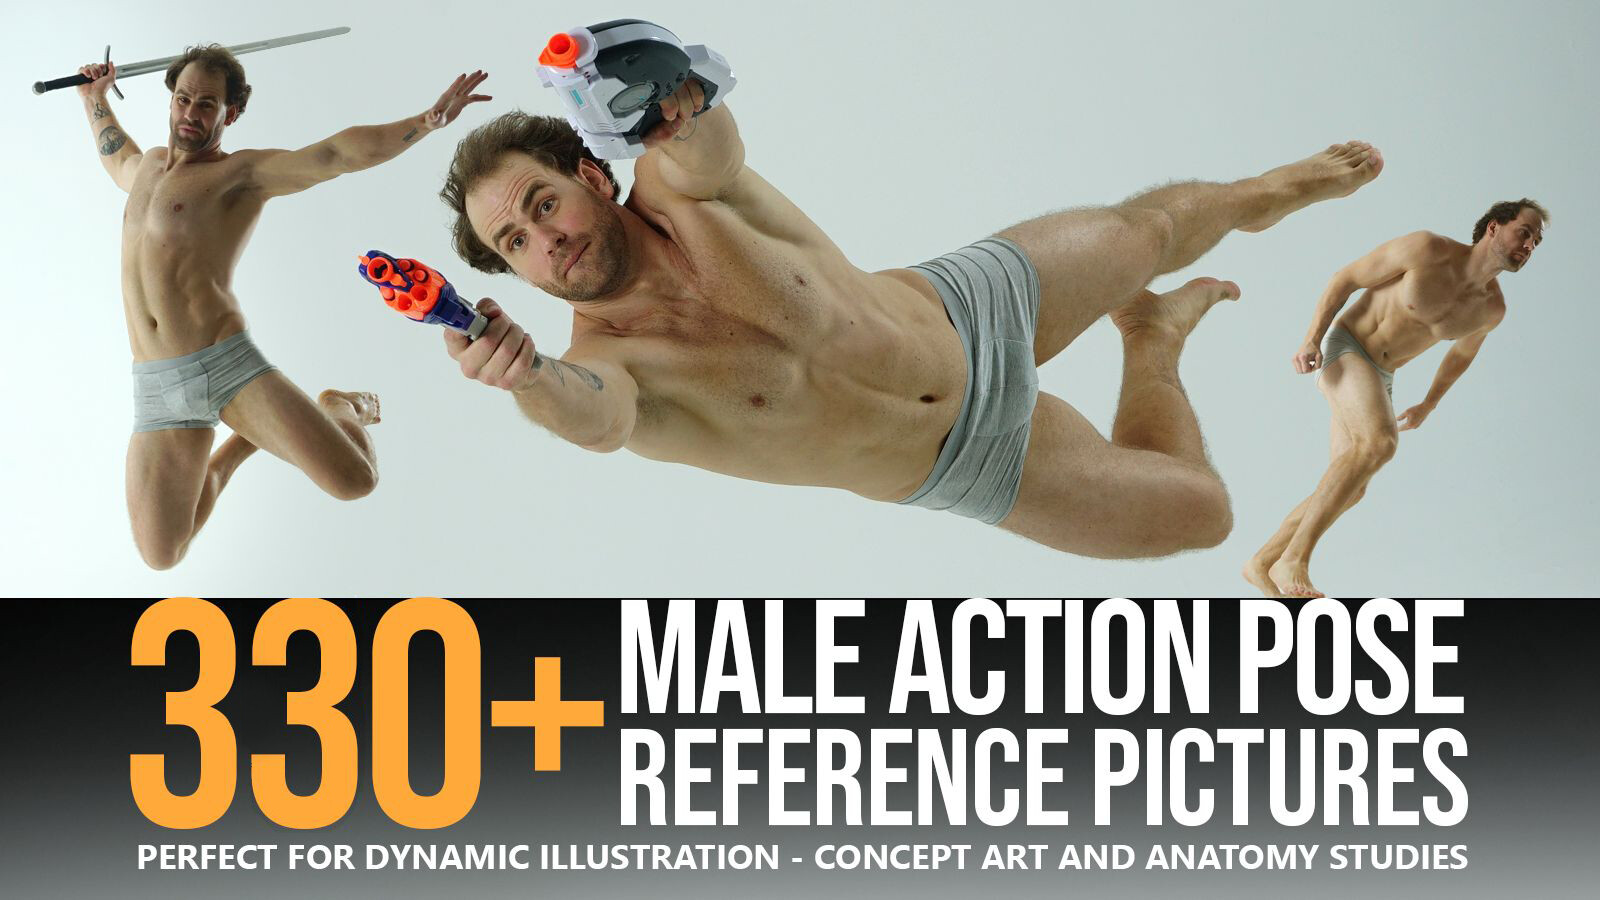 330+ MALE ACTION POSE REFERENCE PICTURES BY GRAFIT STUDIO[ARTSTATION]